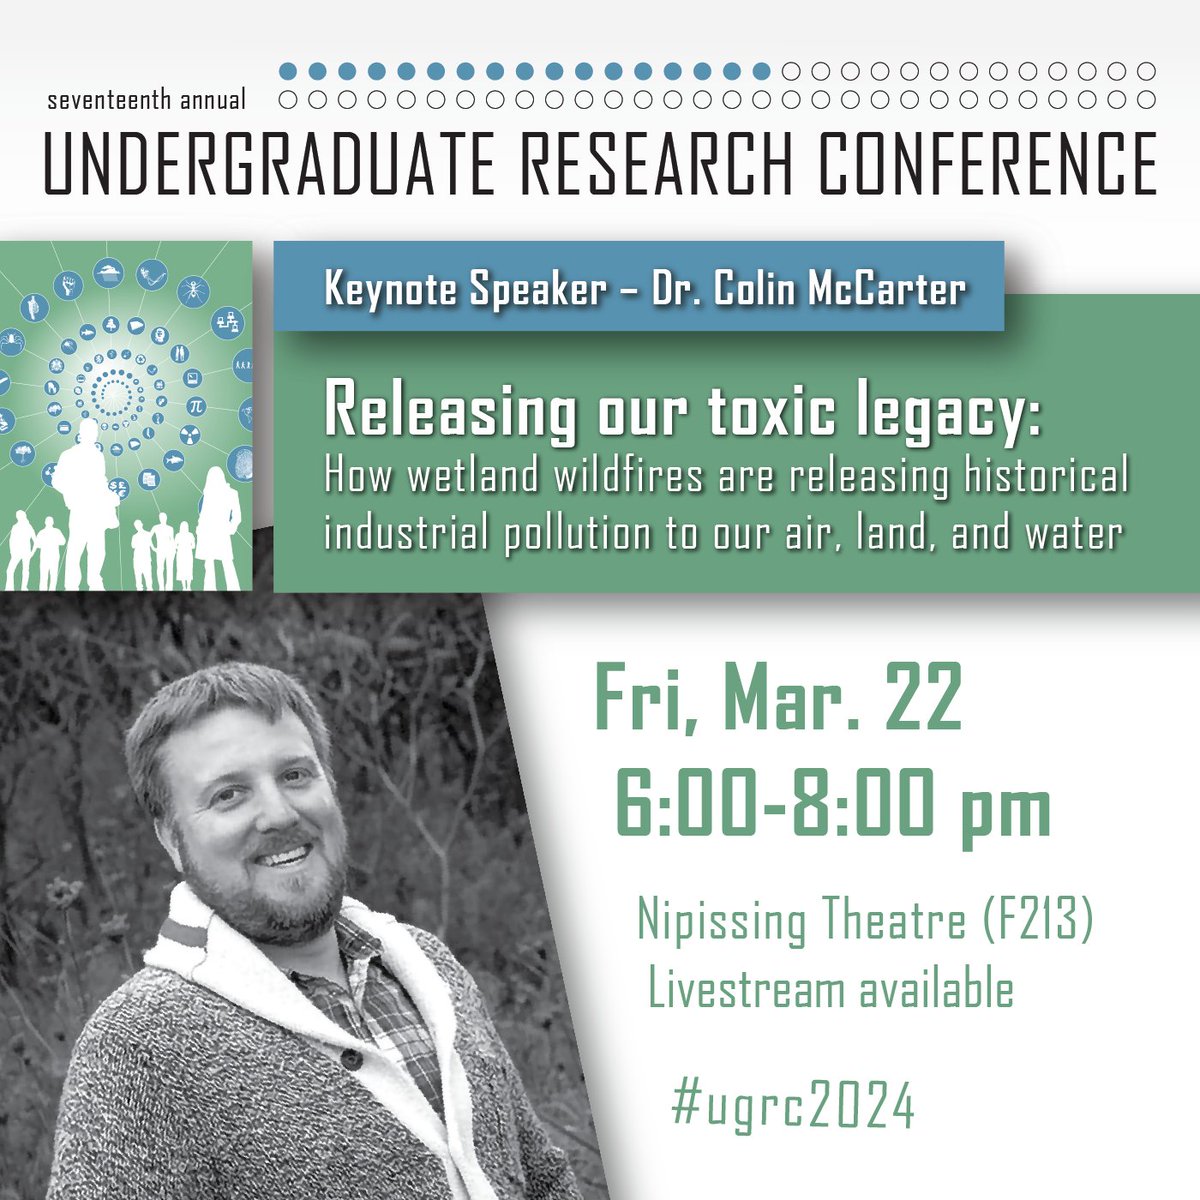 Tonight, Dr. Colin McCarter will give the keynote address at the Undergraduate Research Conference at 6 p.m. on his research into how wetland wildfires are releasing historical industrial pollution into our air, land and water. Learn more: nipissingu.ca/events/ugrc-ke…